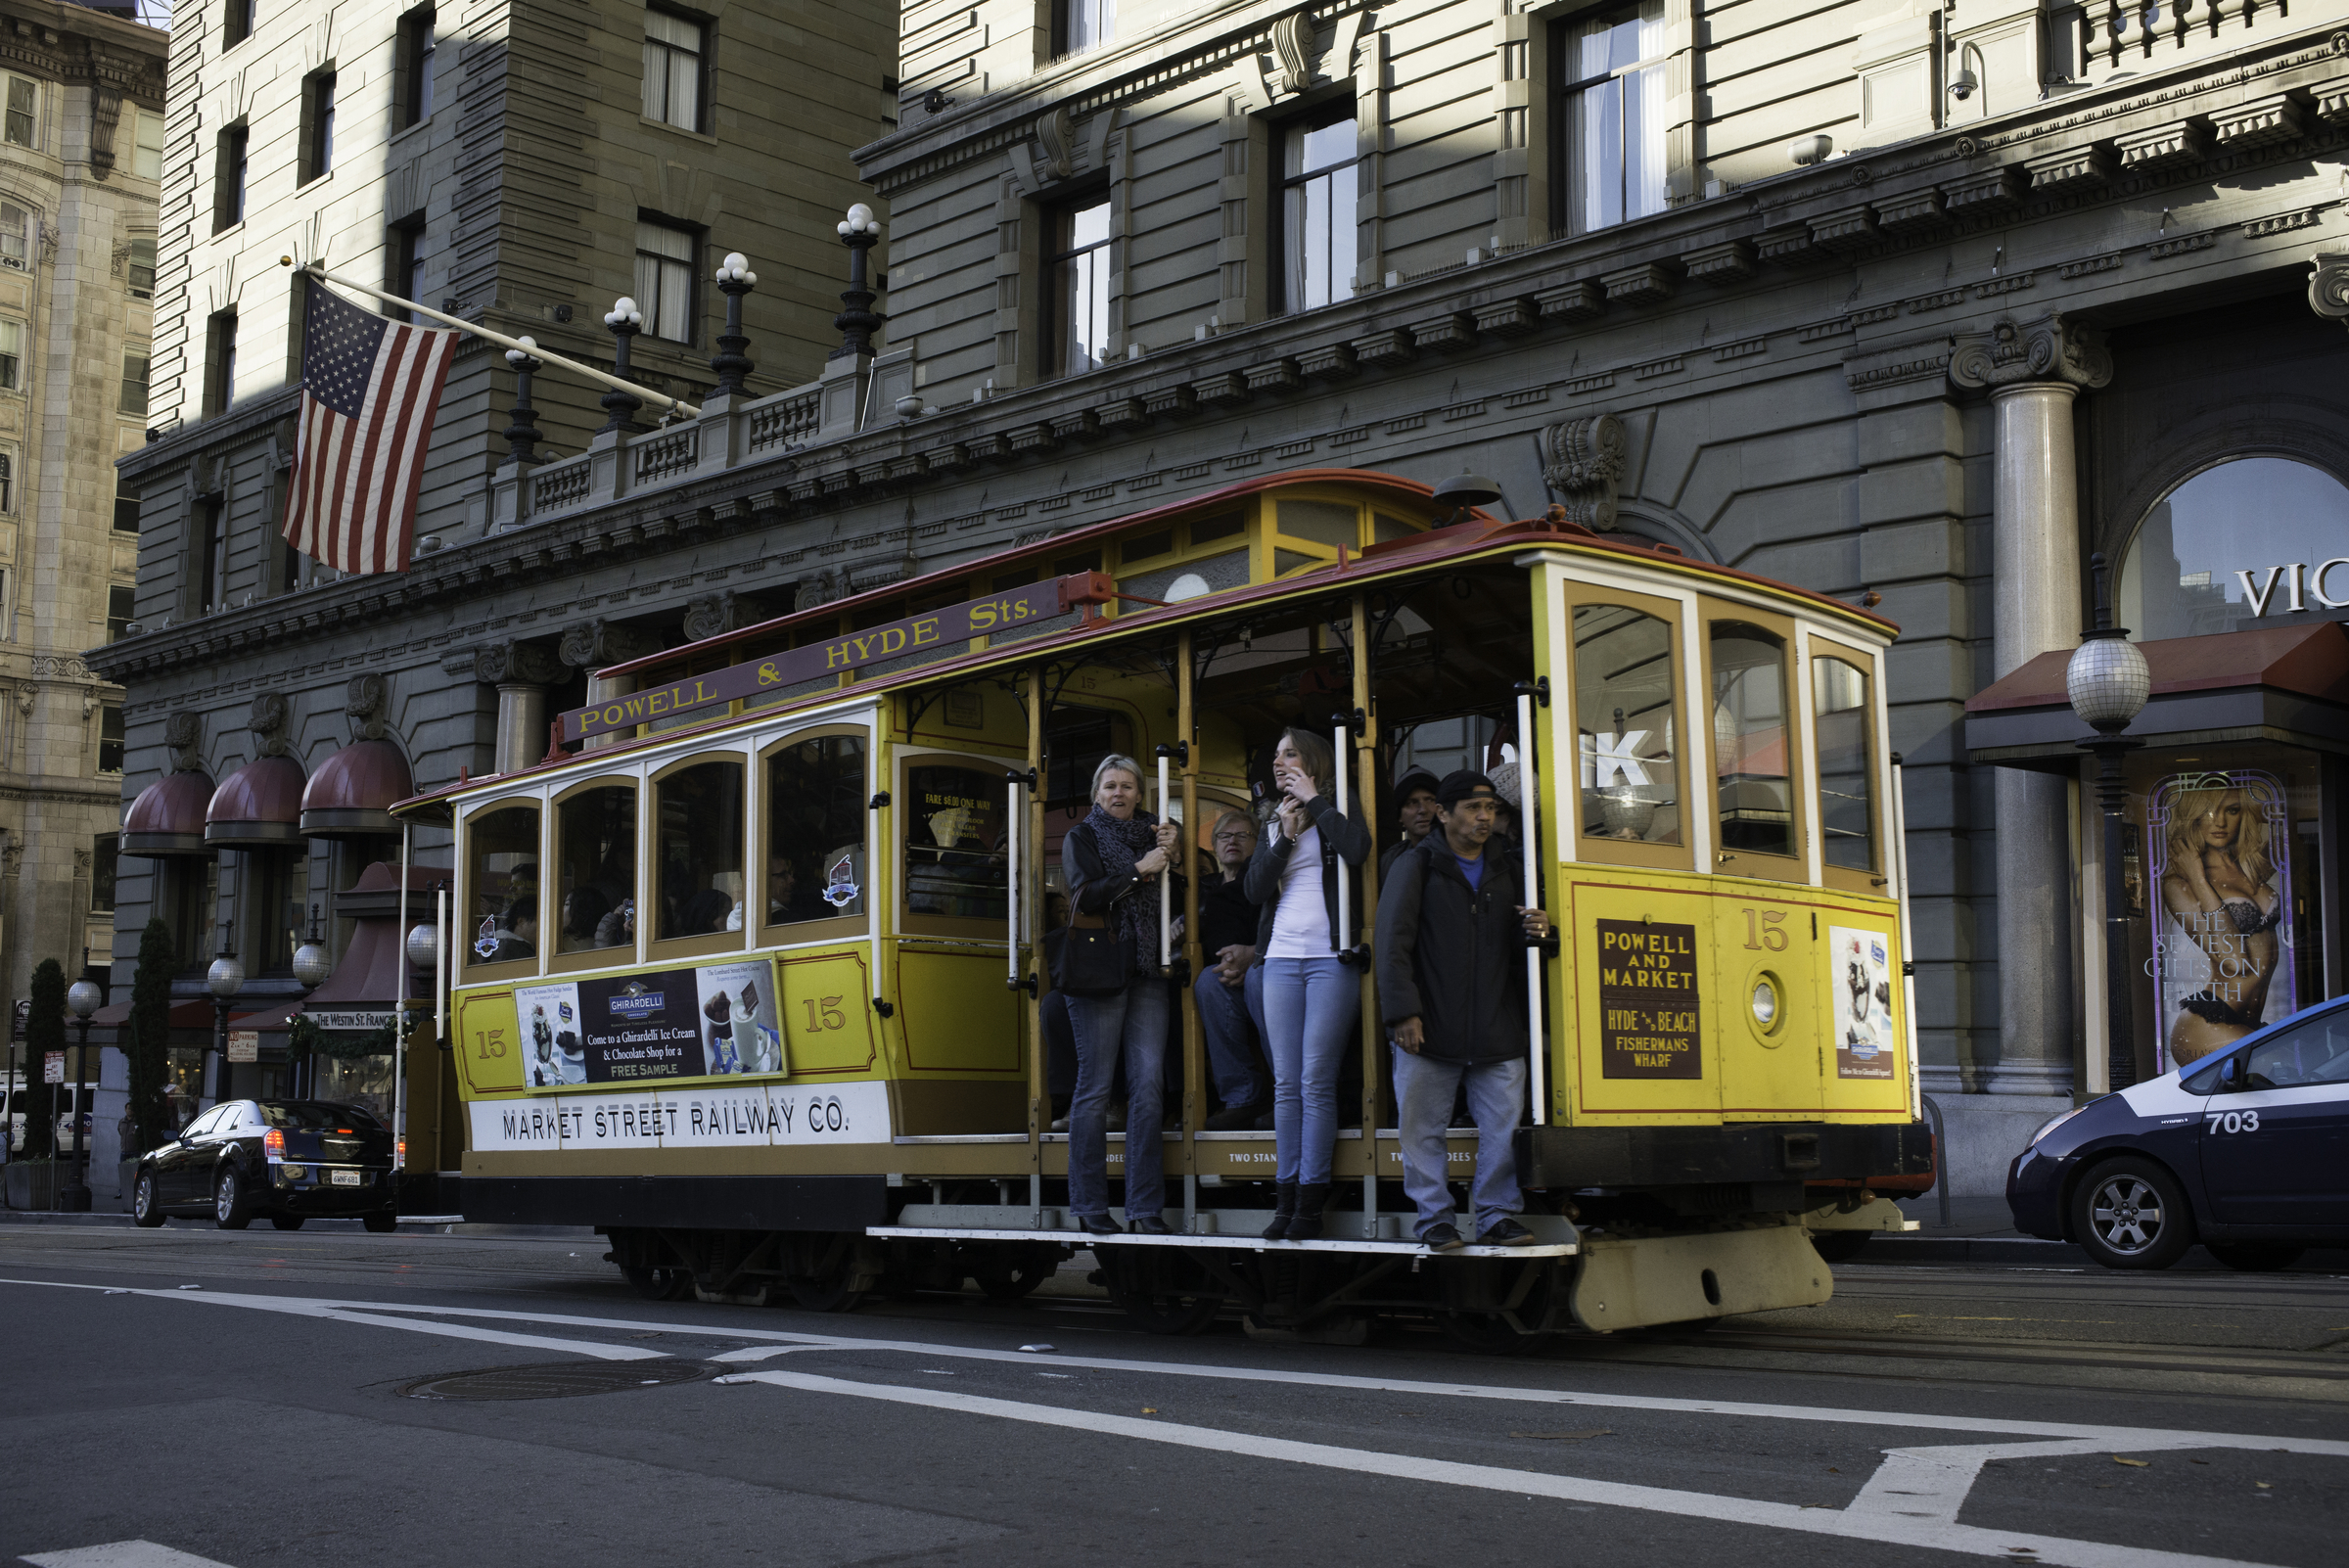 The yellow cable car 15 rumbles north past the Westin St. Francis Hotel on Powell Street.